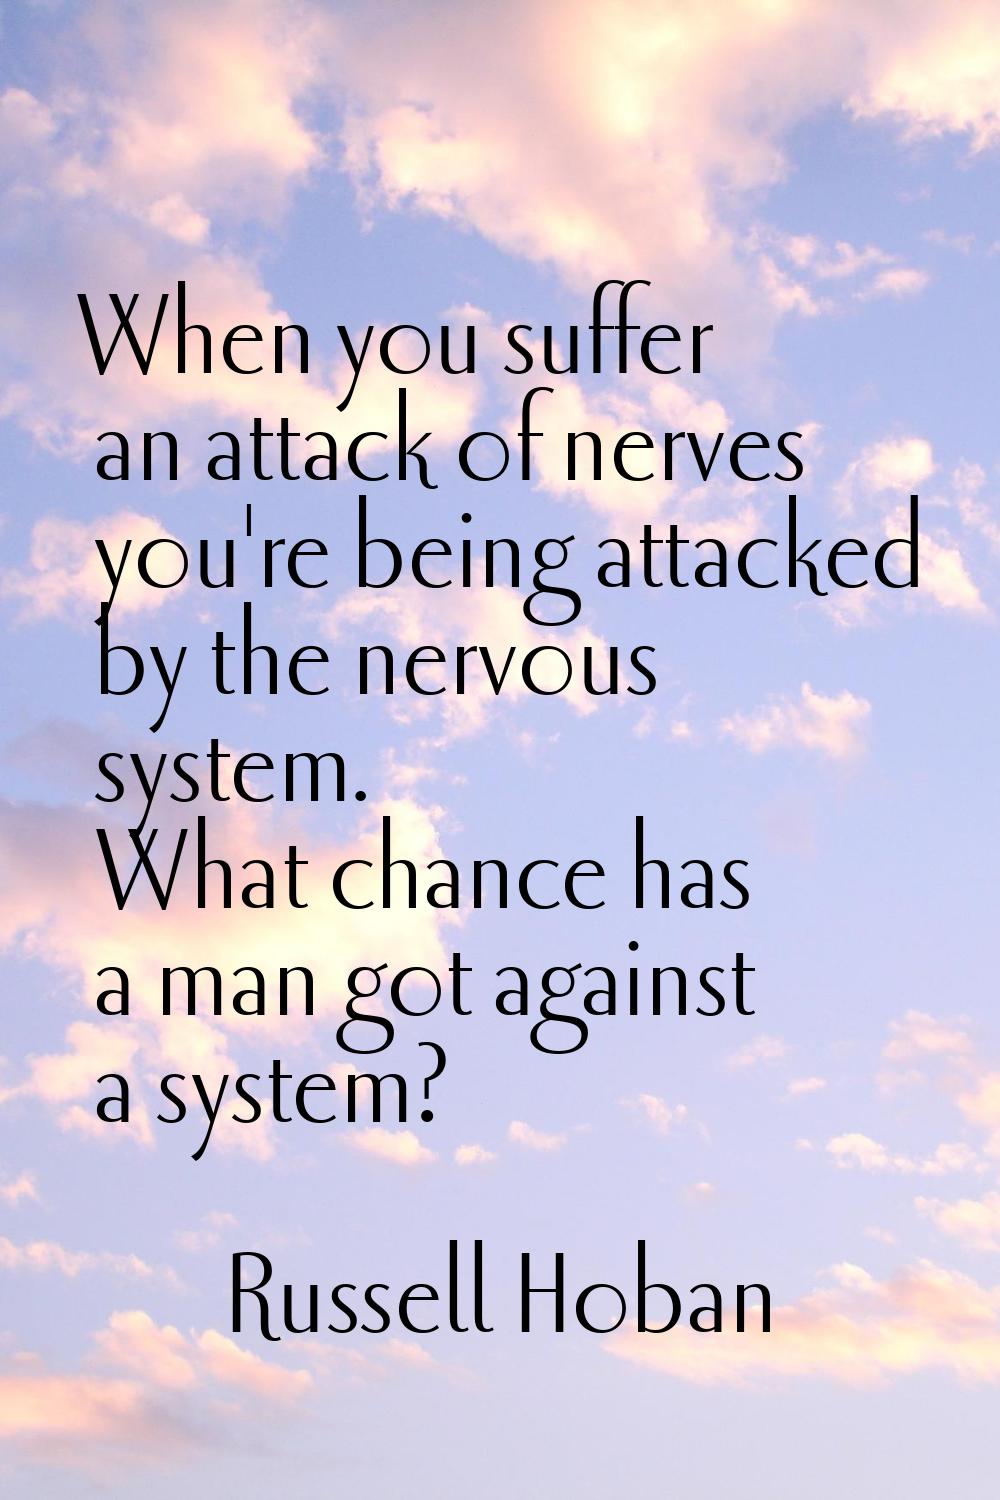 When you suffer an attack of nerves you're being attacked by the nervous system. What chance has a 